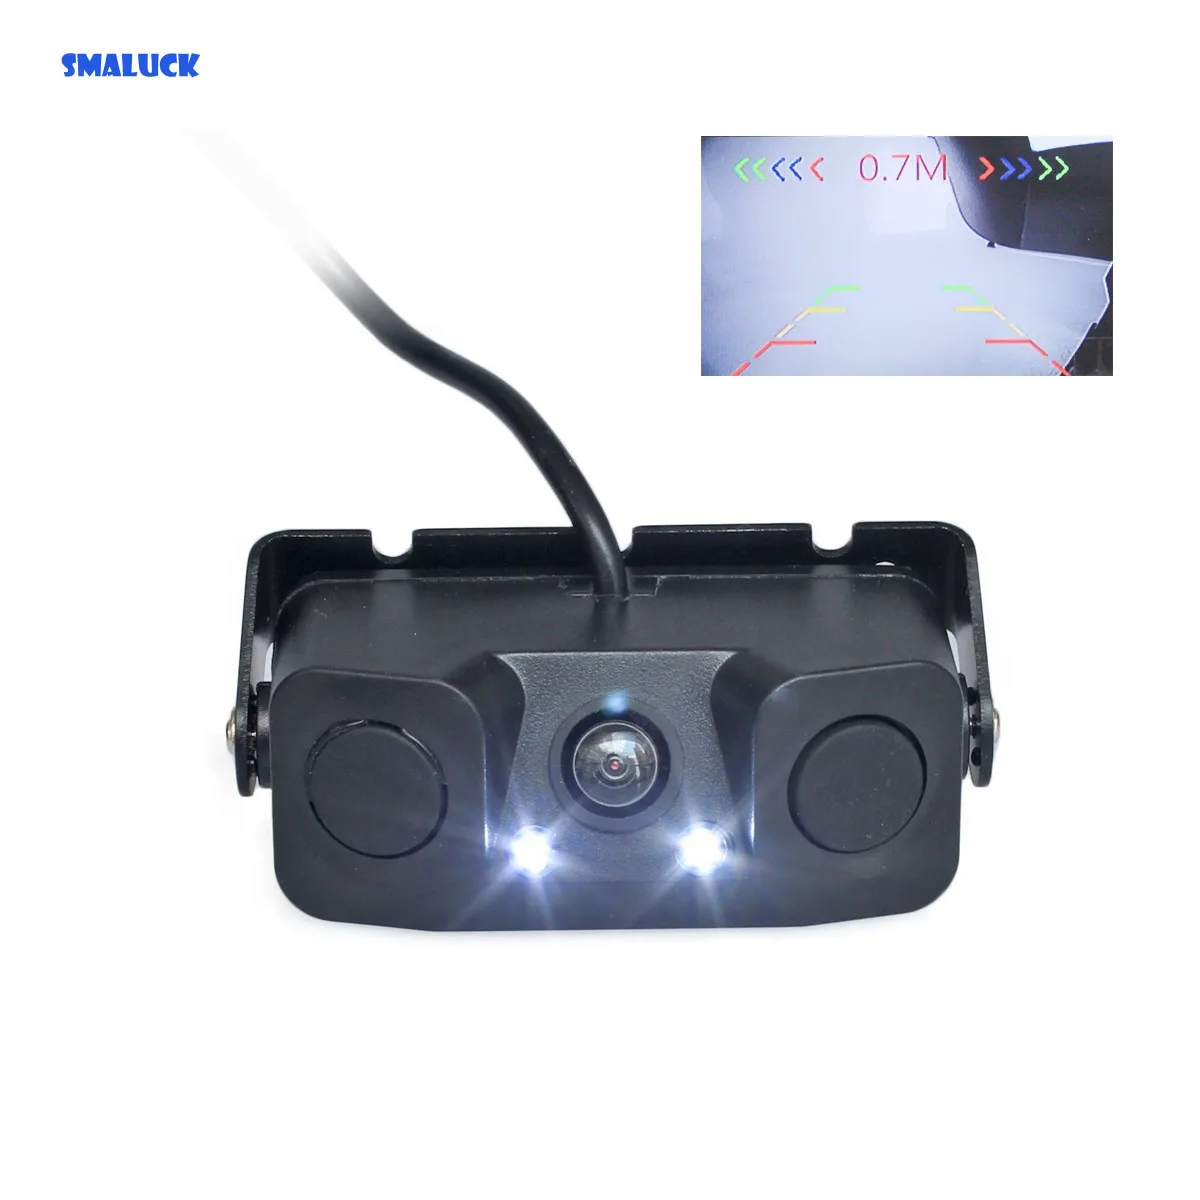 

SMALUCK Waterproof Packing Radar Sensor Car Reverse LED Night Vision Rear View Car Camera Wide Angle for Parking Assistance Kit